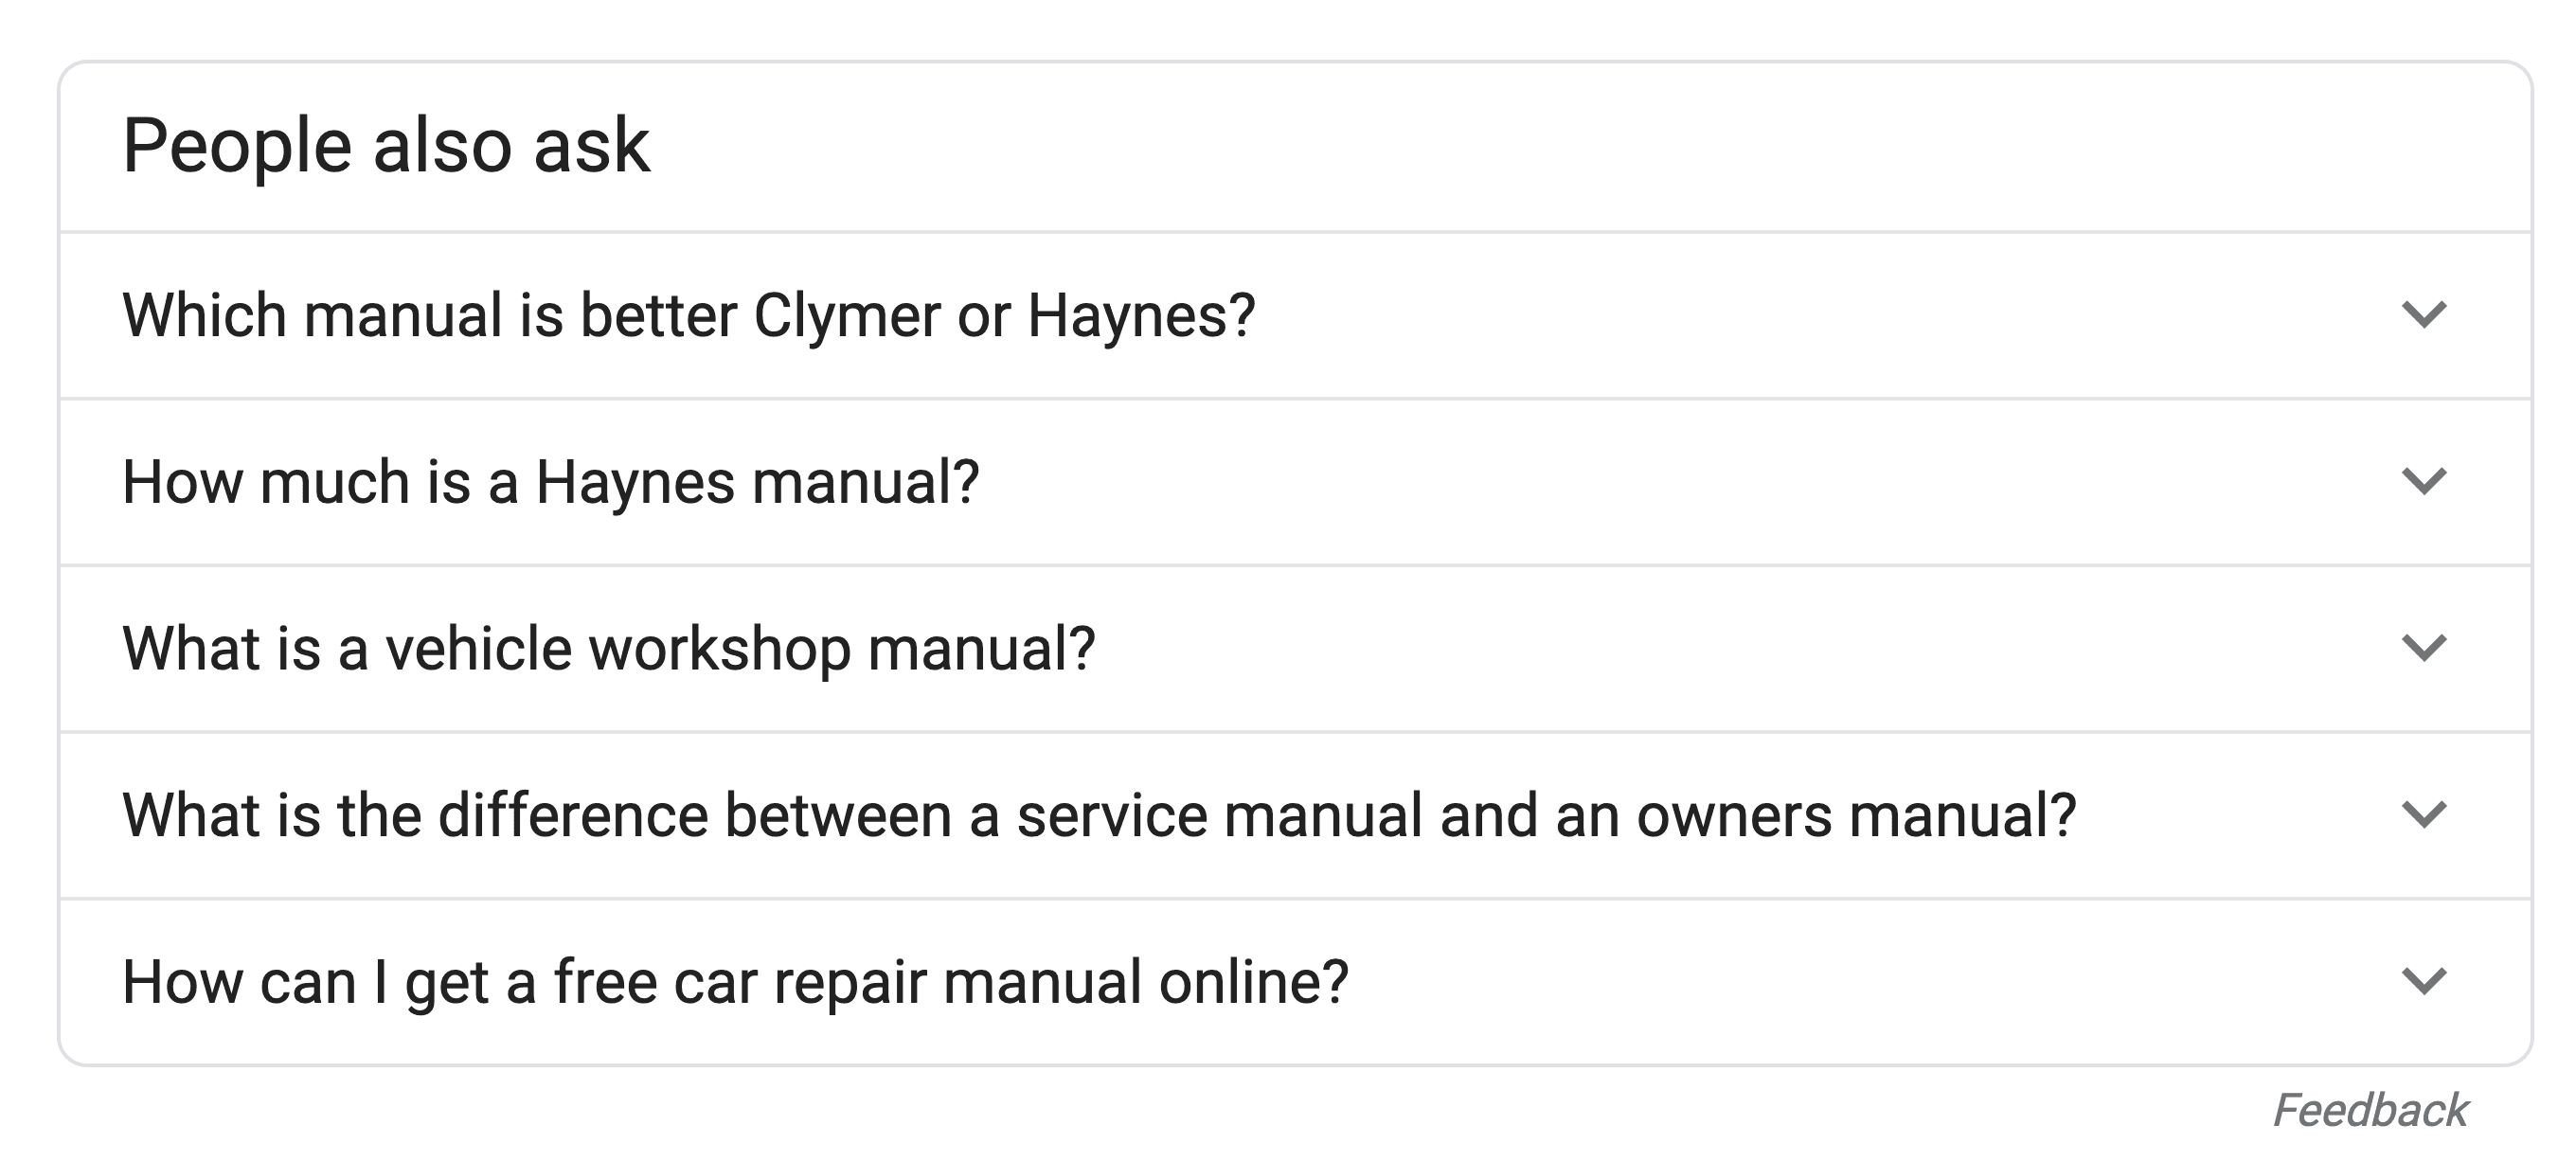 Google's "People also ask"